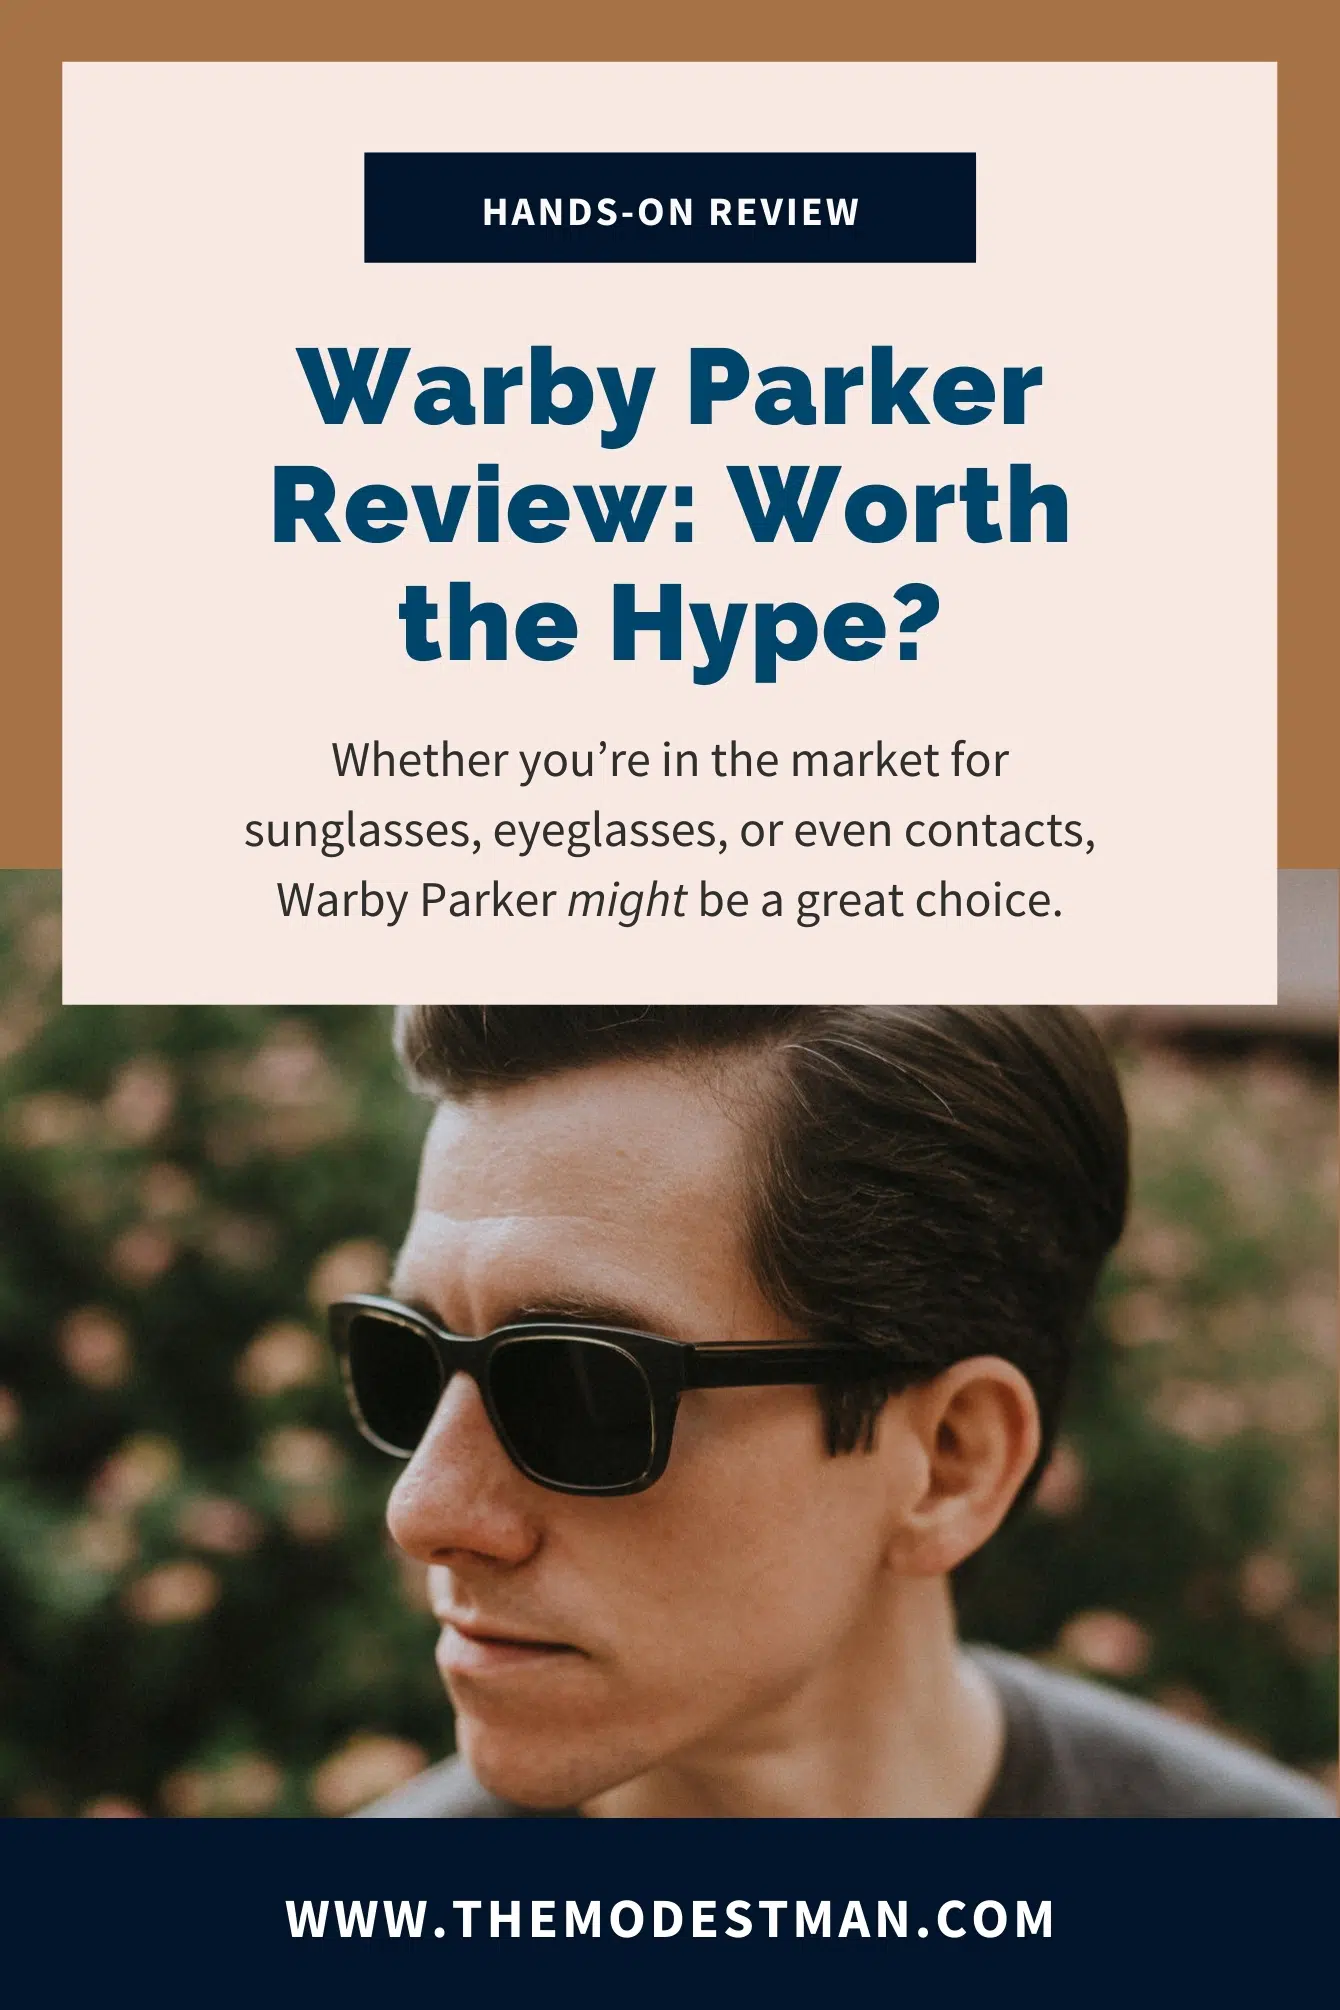 Warby Parker honest review